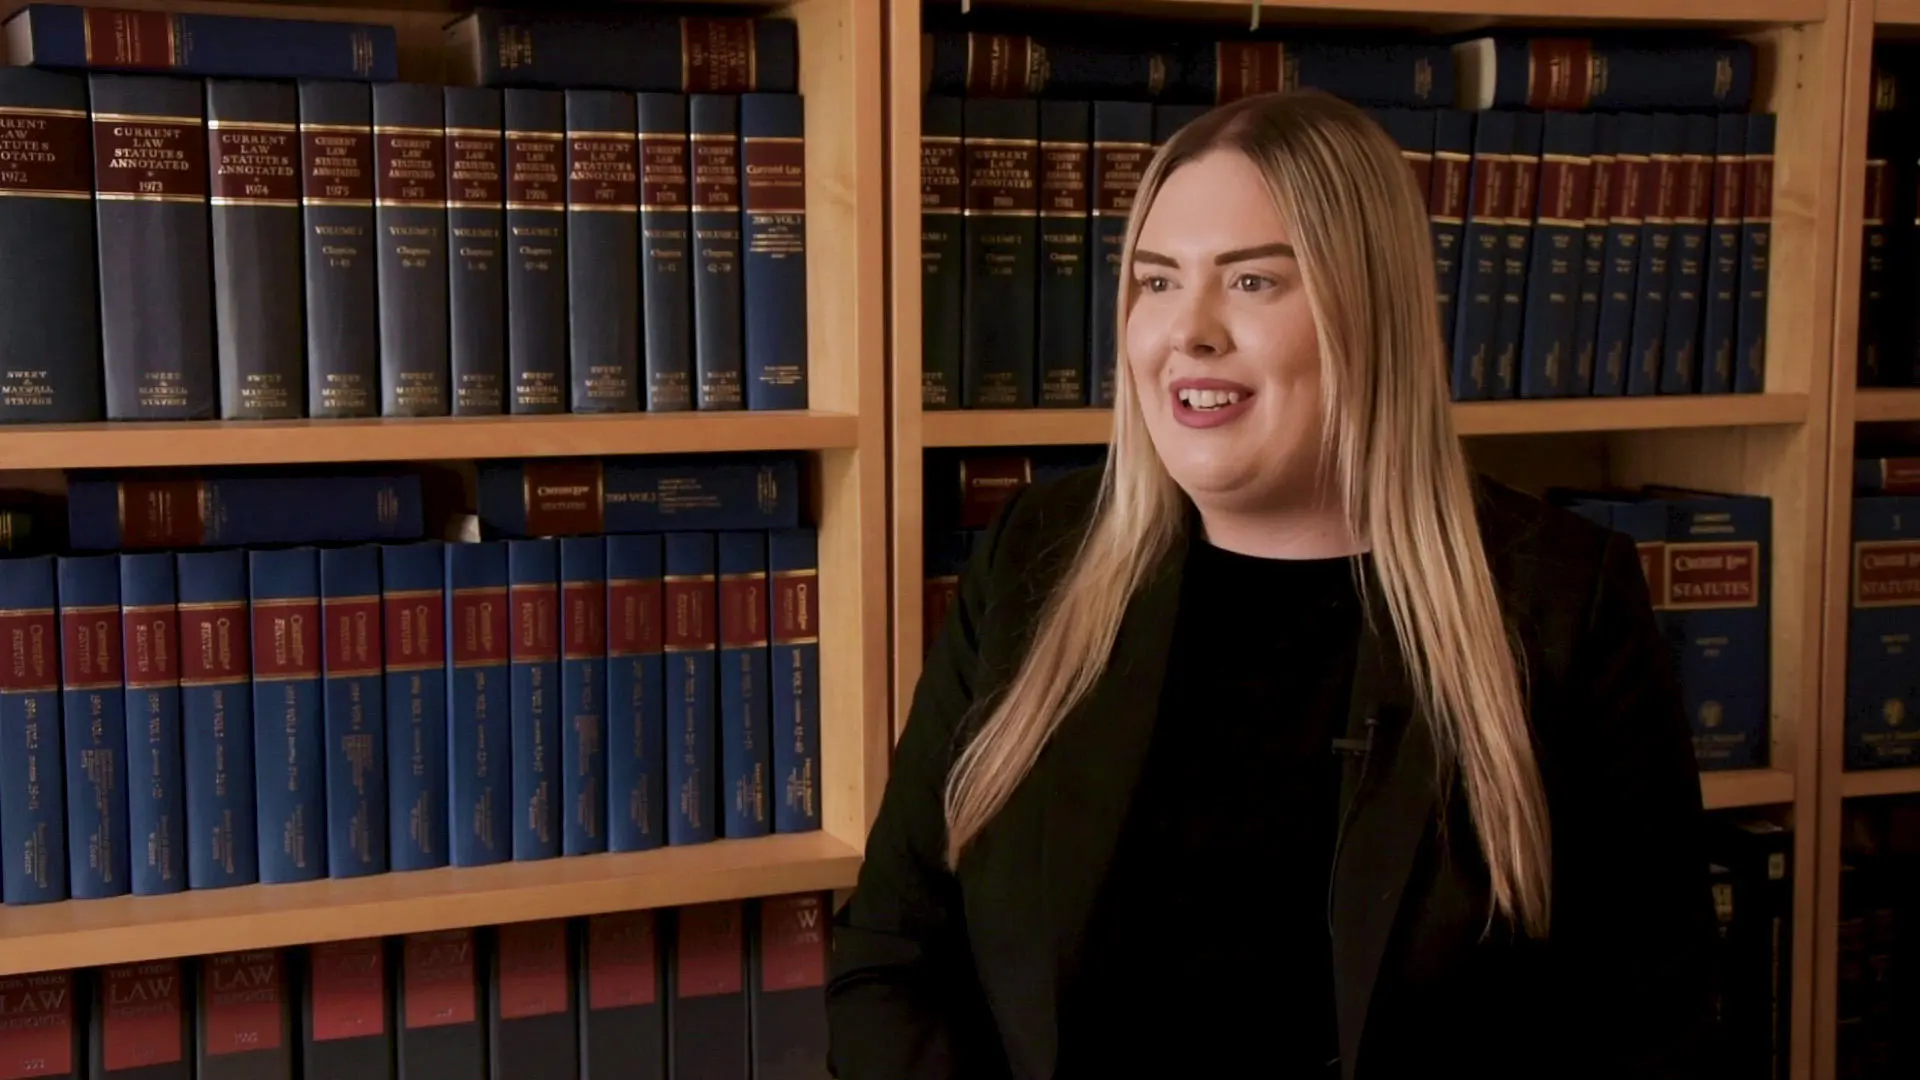 Paige Symns in an interview with law books in the background